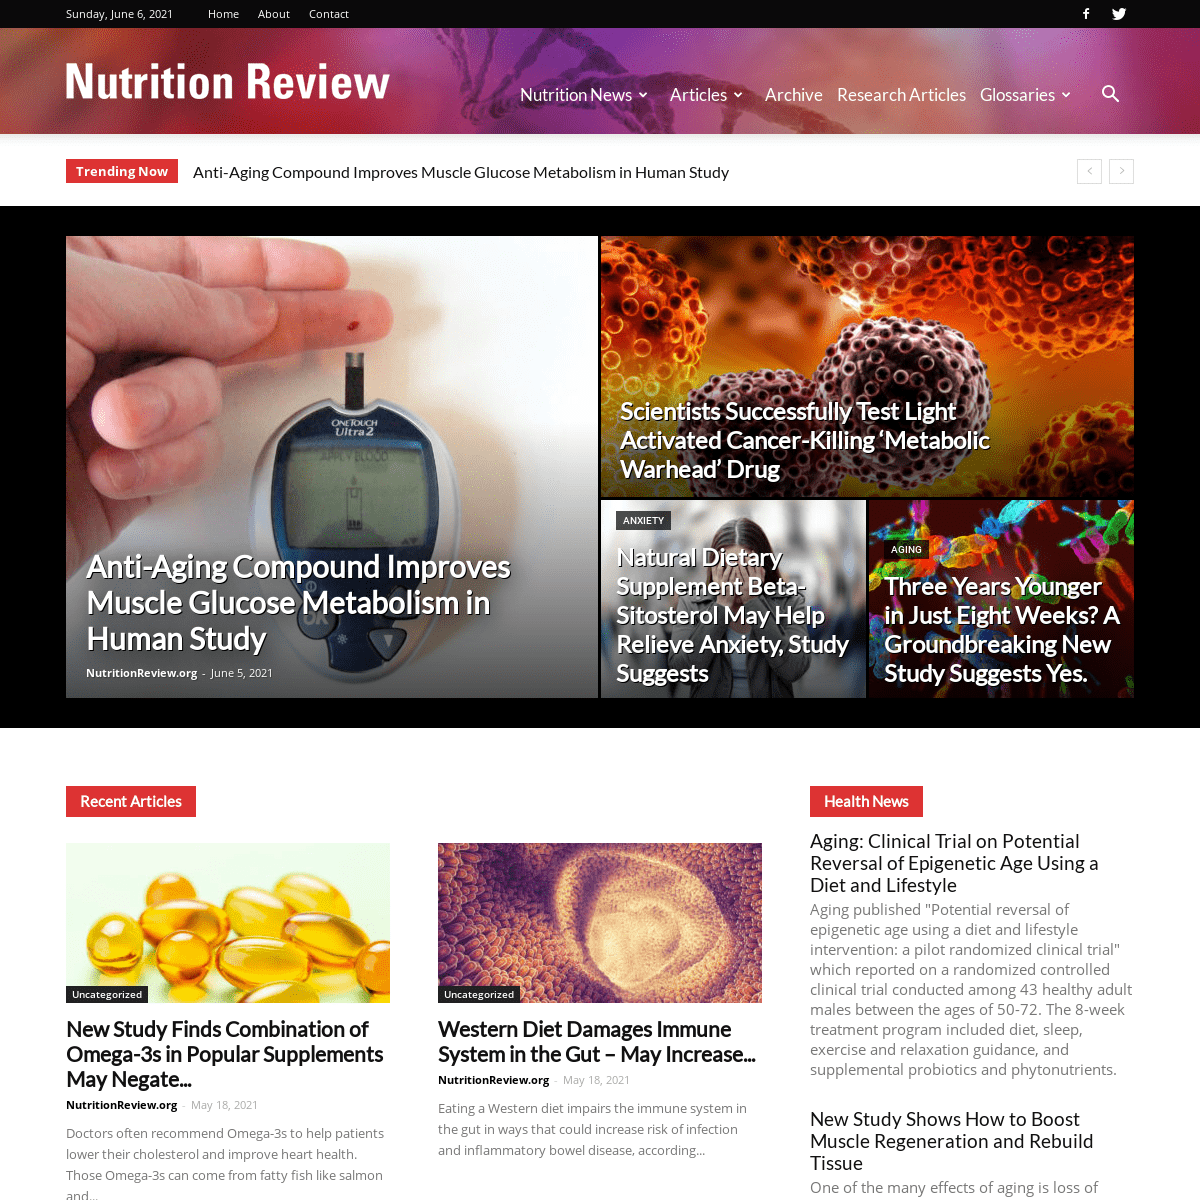 A complete backup of https://nutritionreview.org